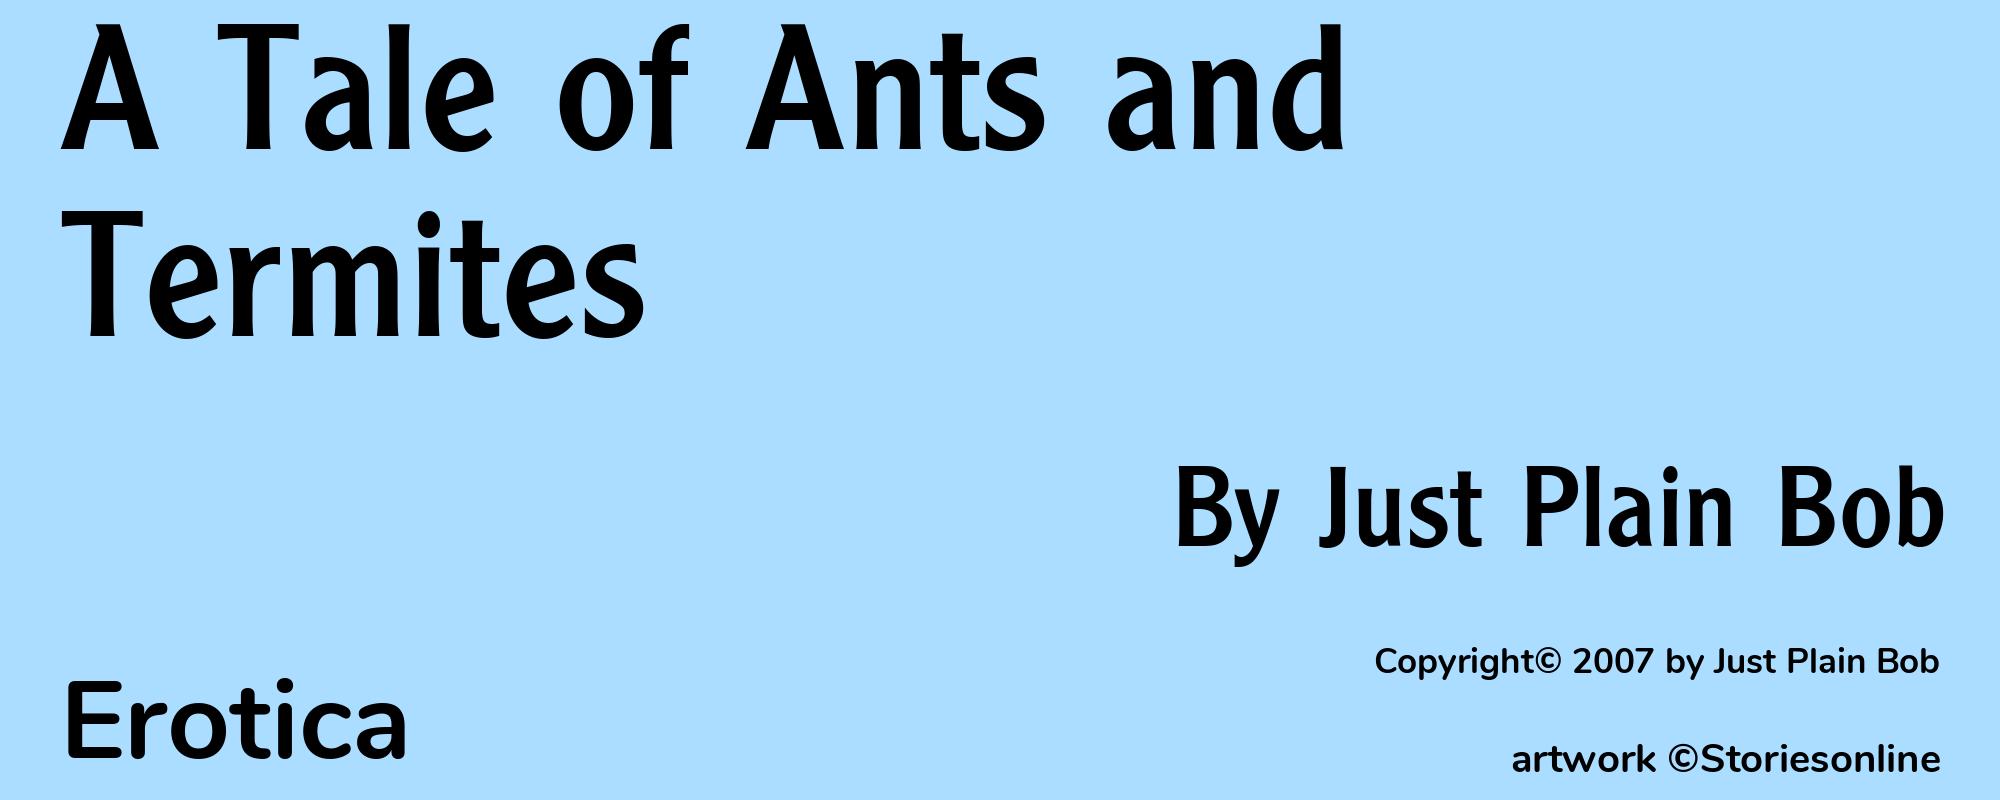 A Tale of Ants and Termites - Cover